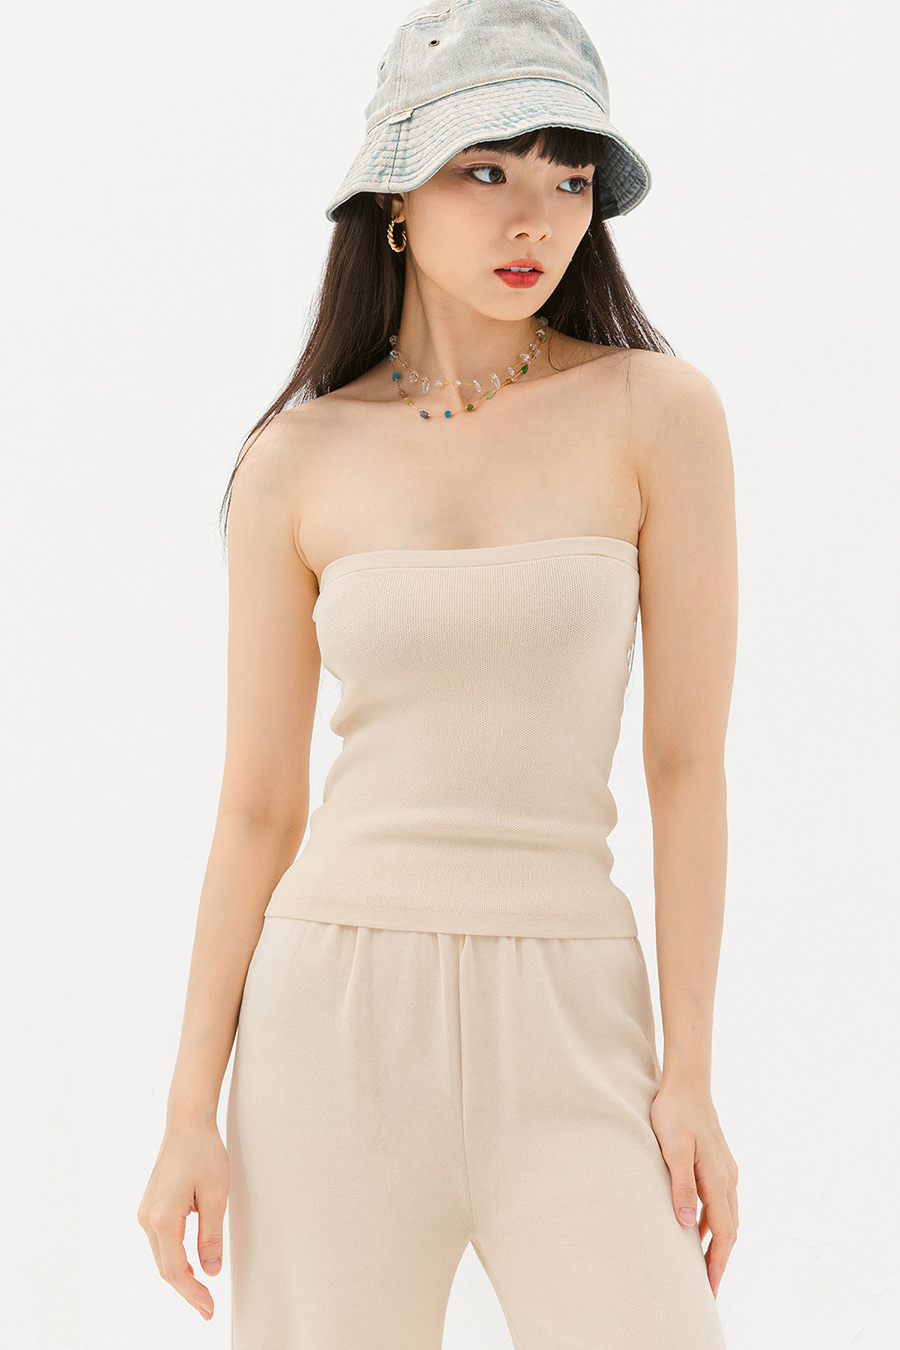 *SALE* PAOLA TOP - SOFT CREAM [BY MODPARADE]